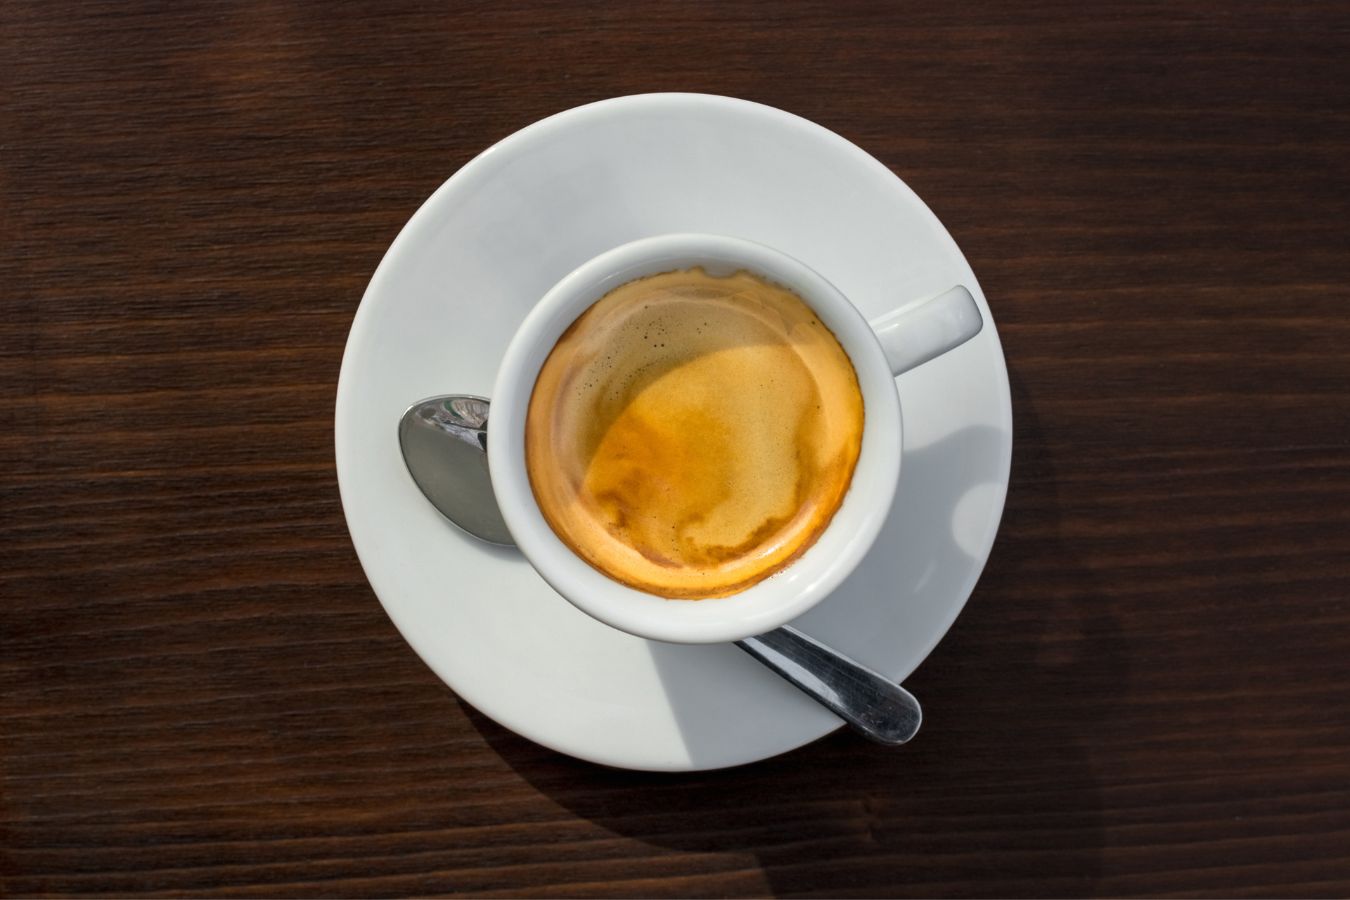 How To Make The Espresso Crema Layer Beautiful And Melt Longer?